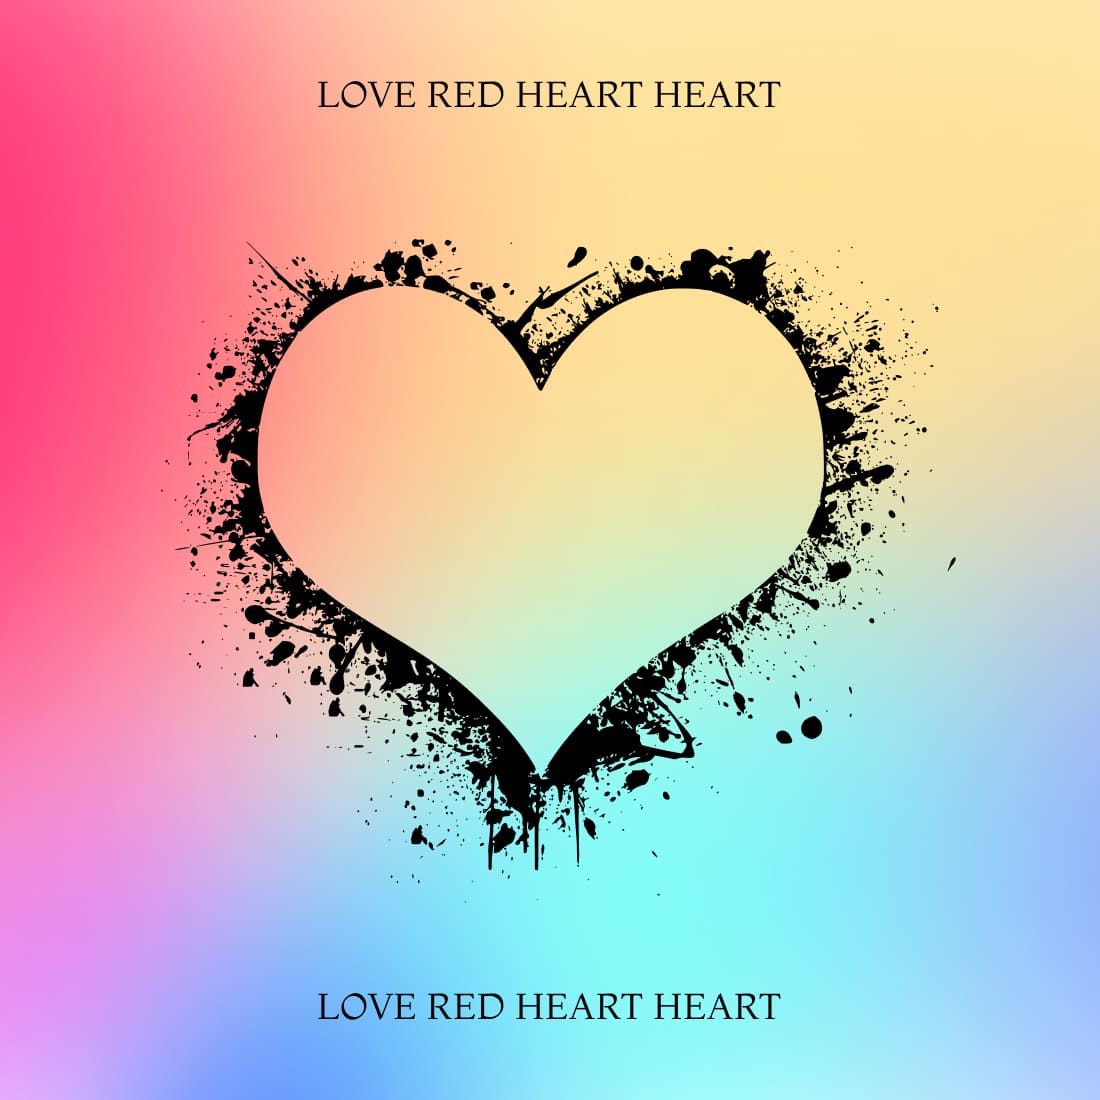 Love Red Heart Heart - Colorful Example.